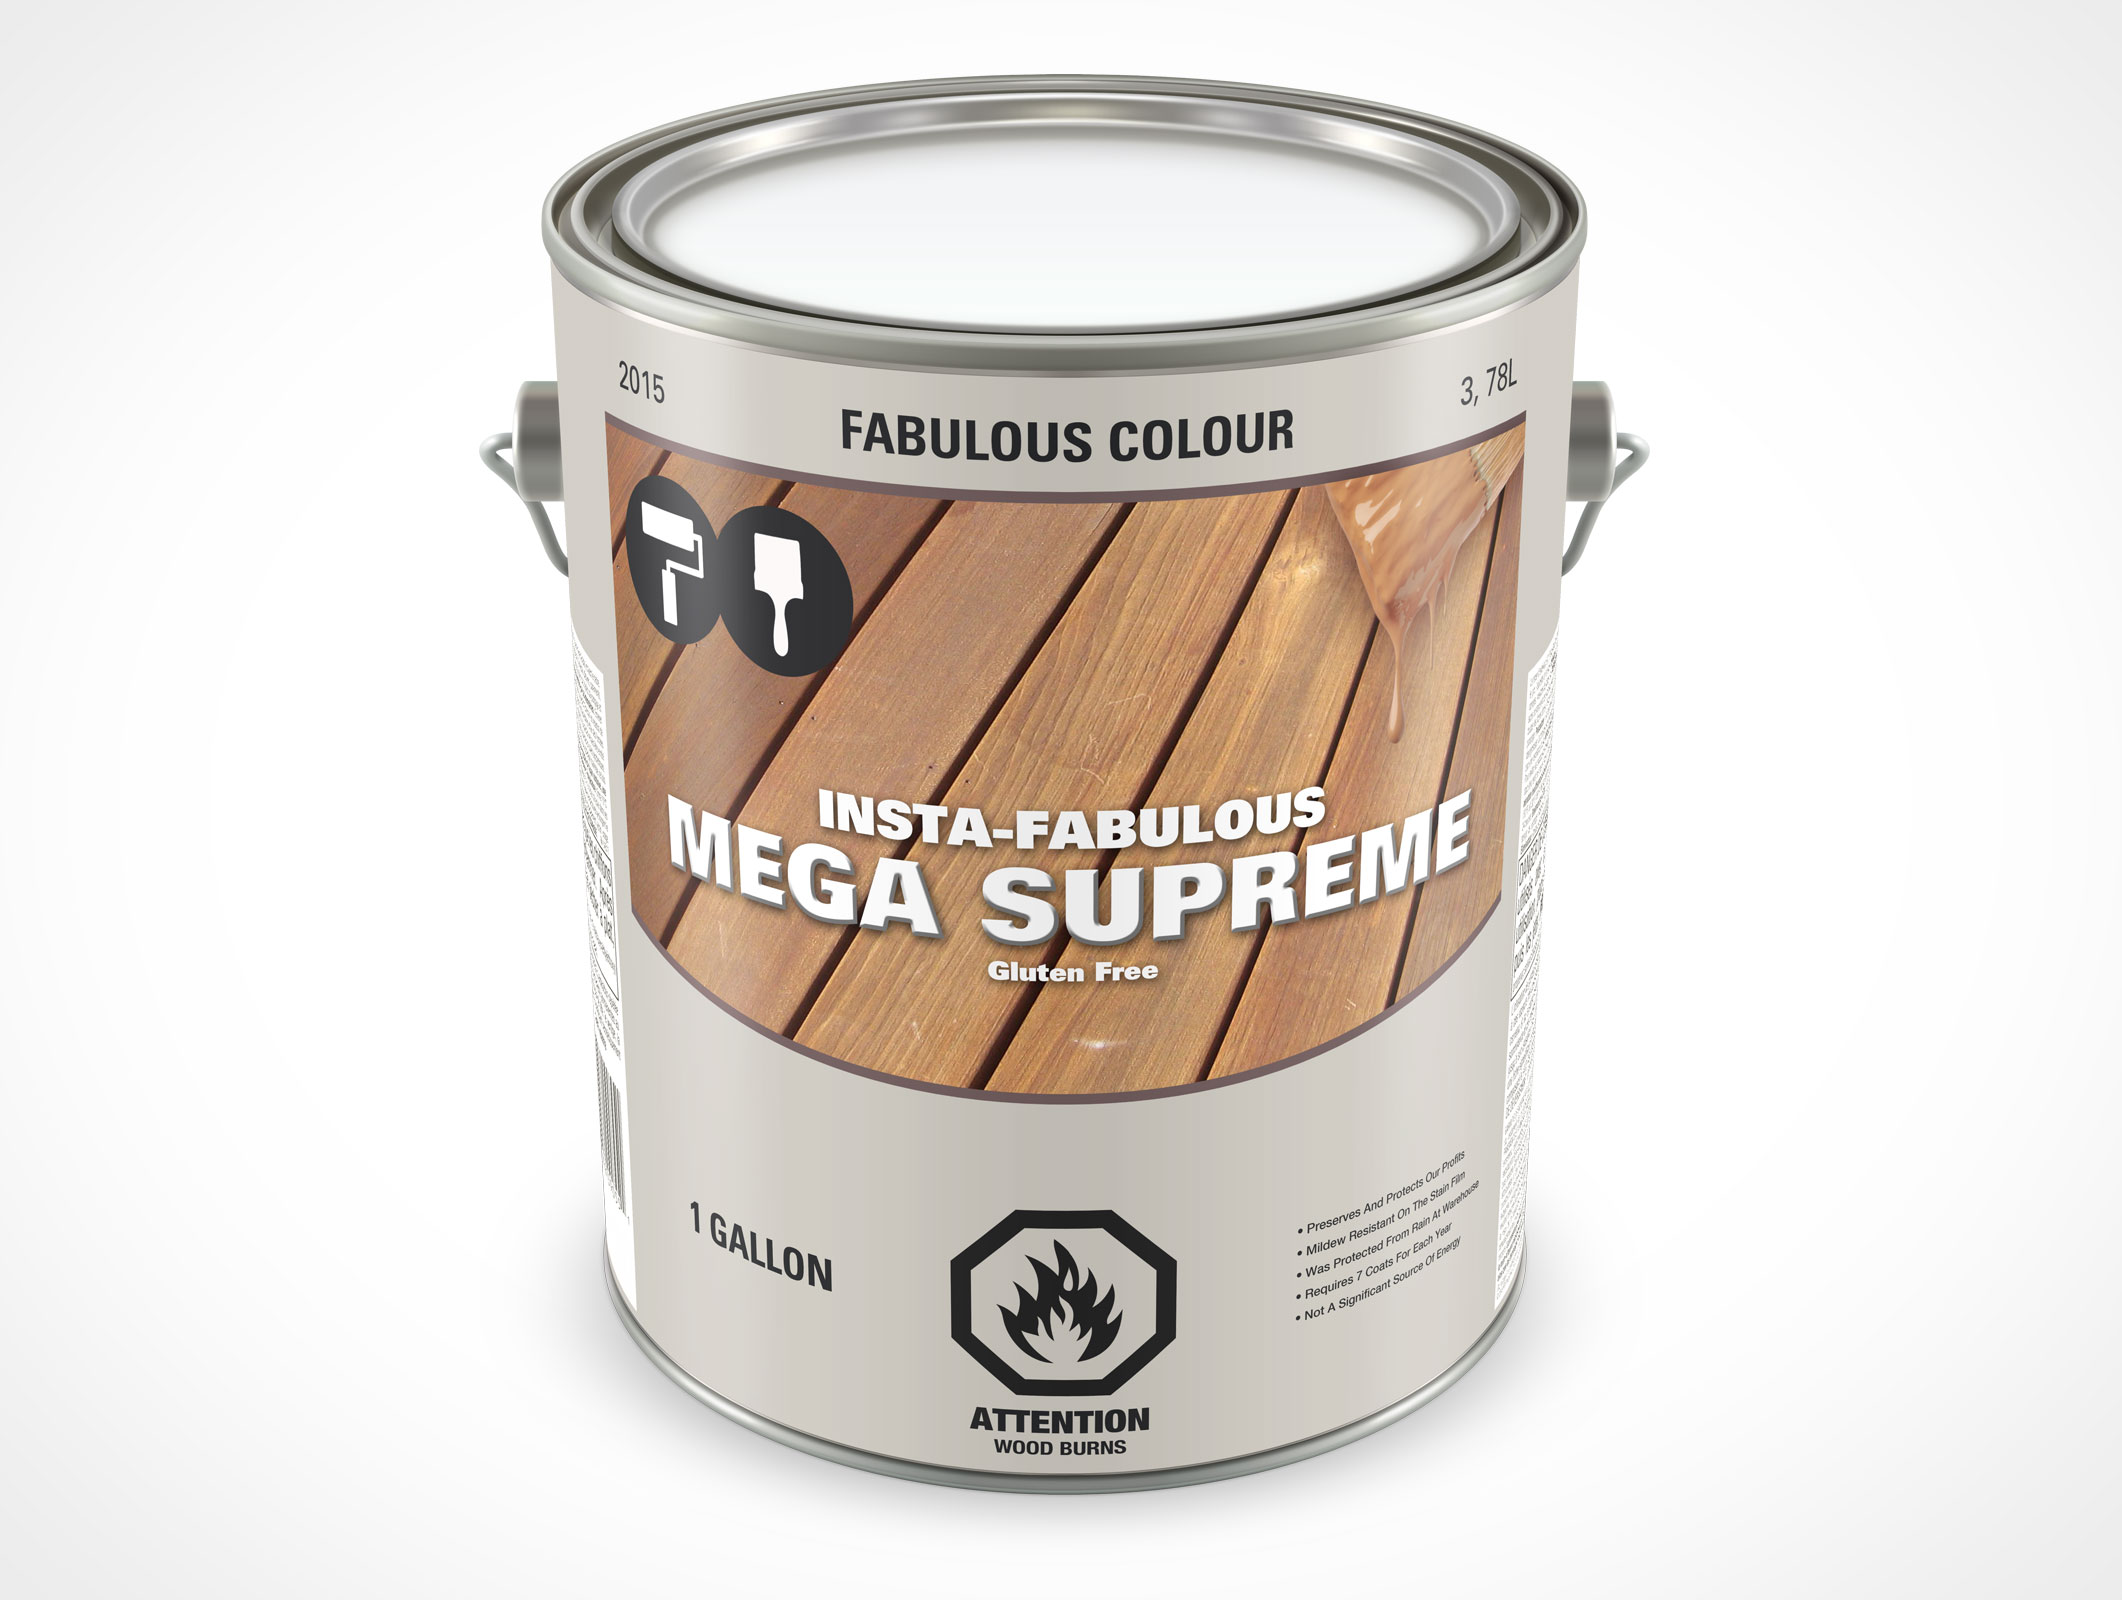 1 Gallon Paint Can Mockup 23r4